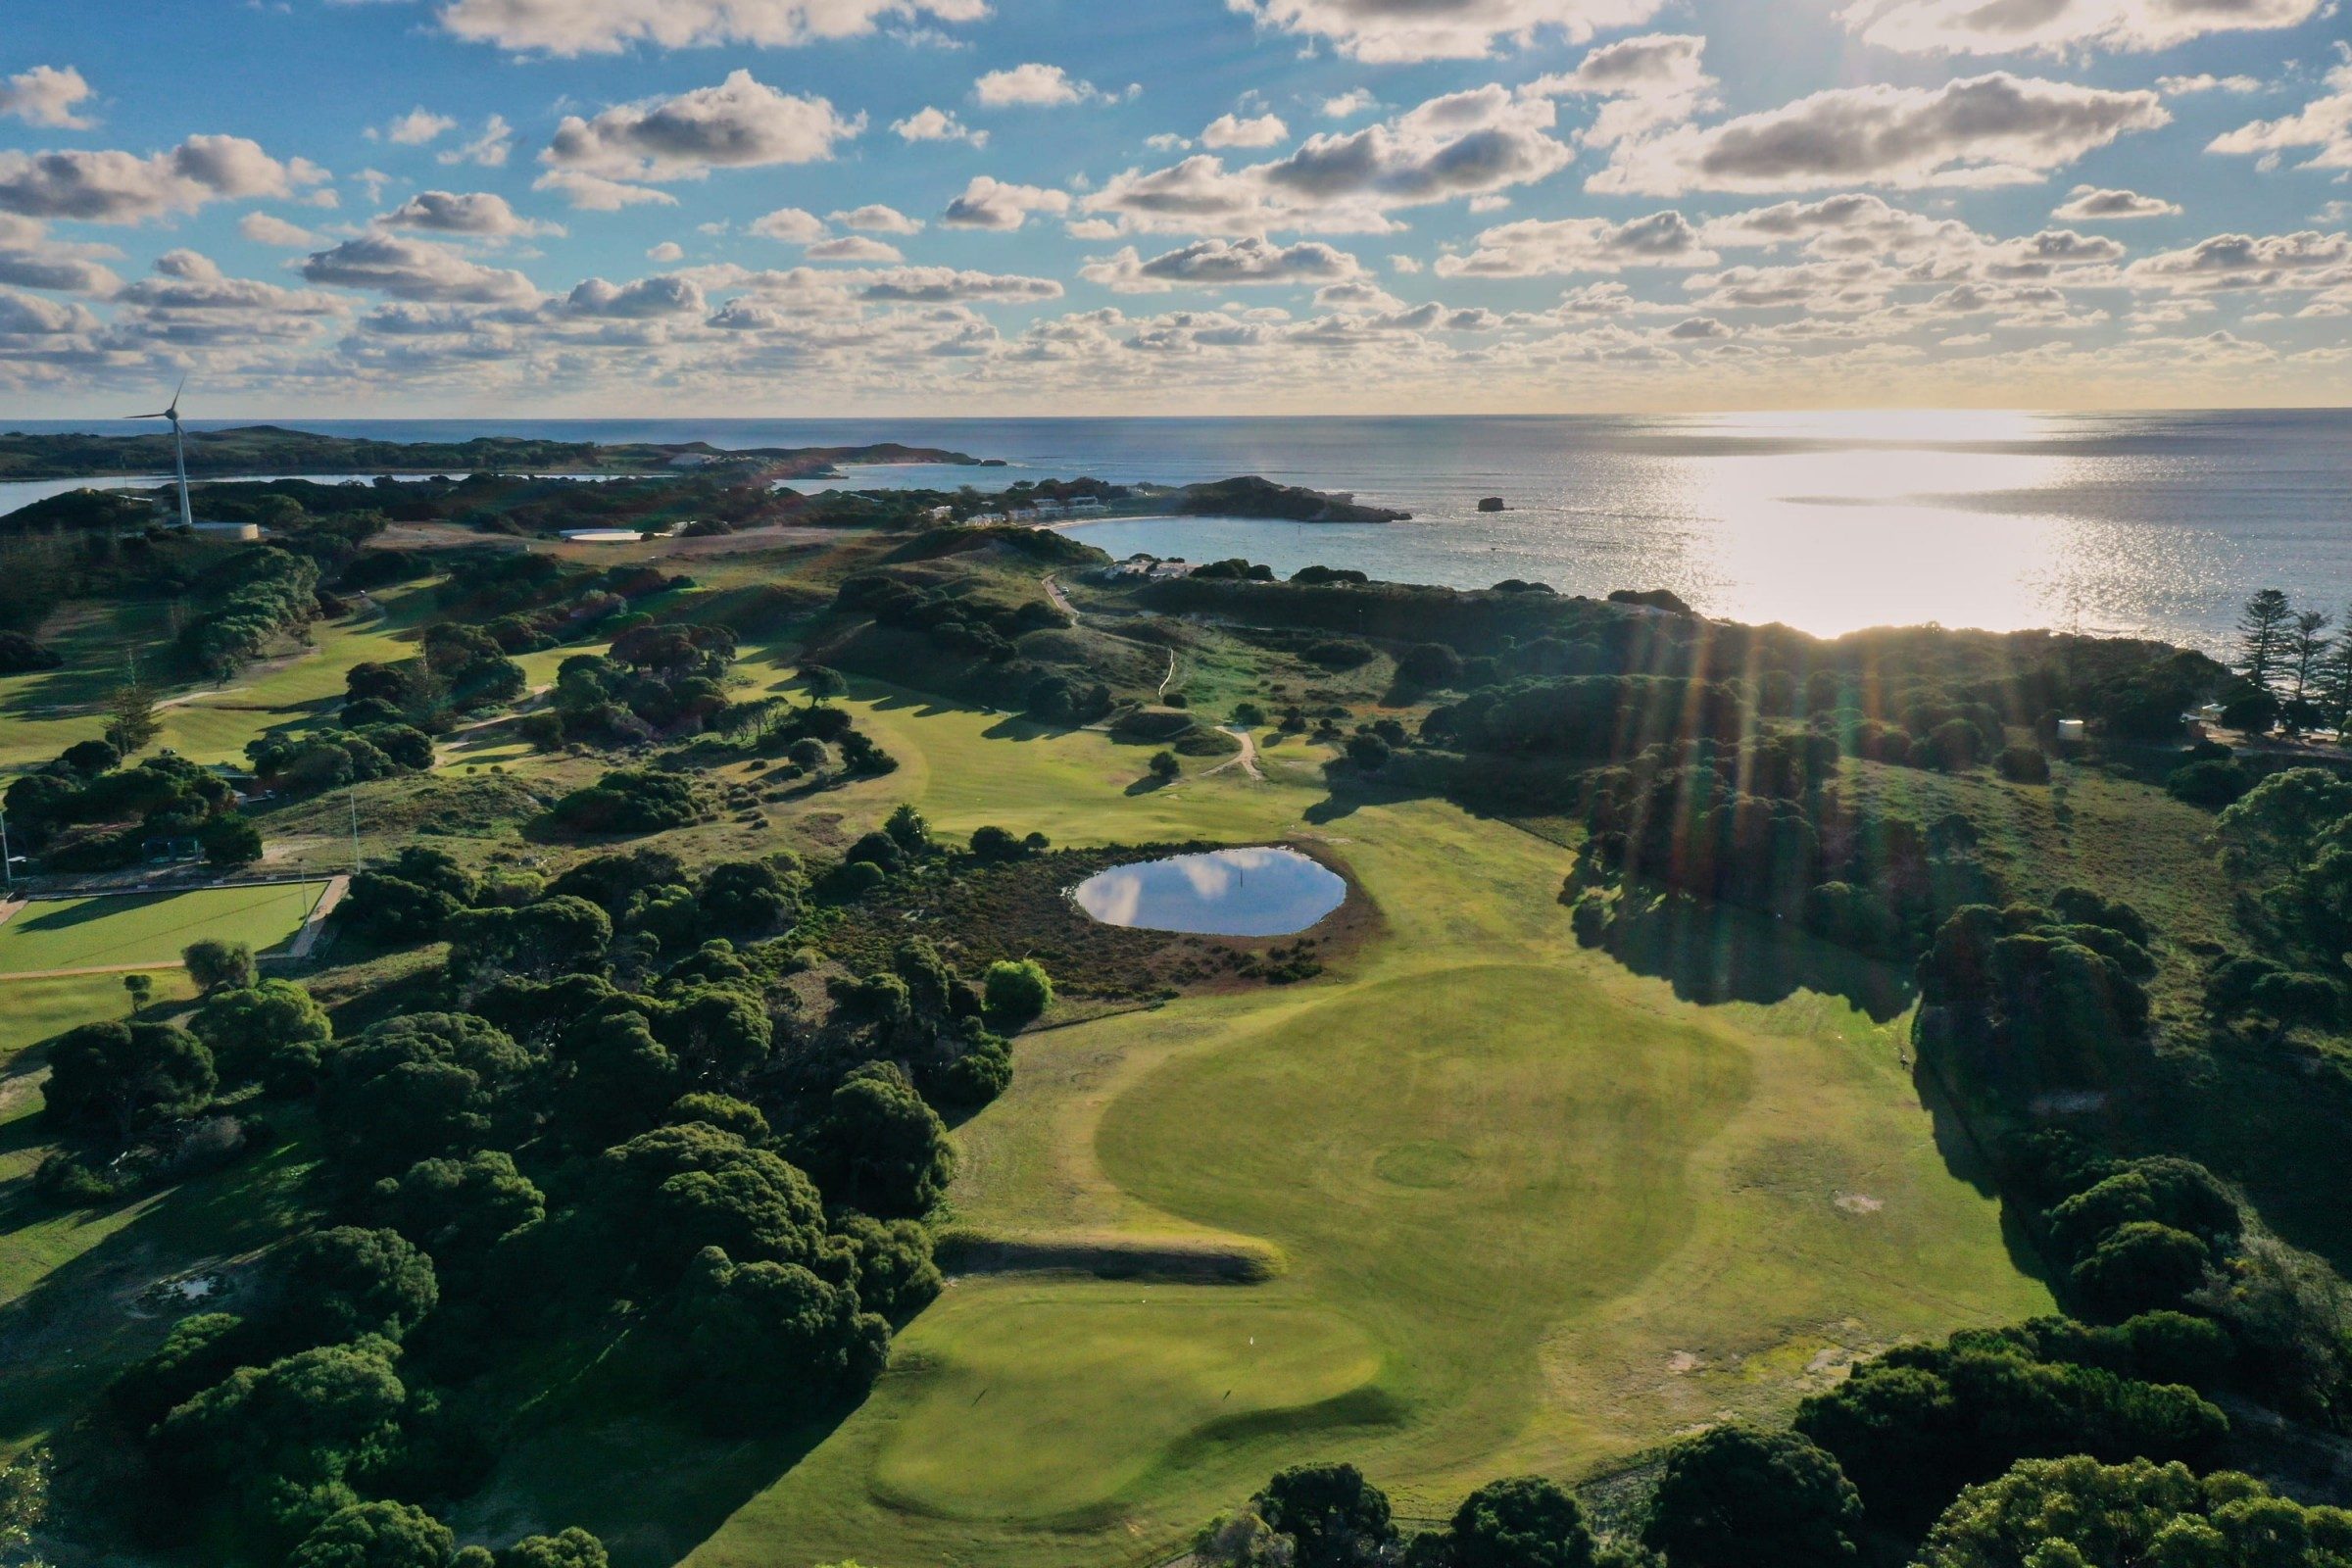 Drive, putt and bogey the day away on Rottnest Island